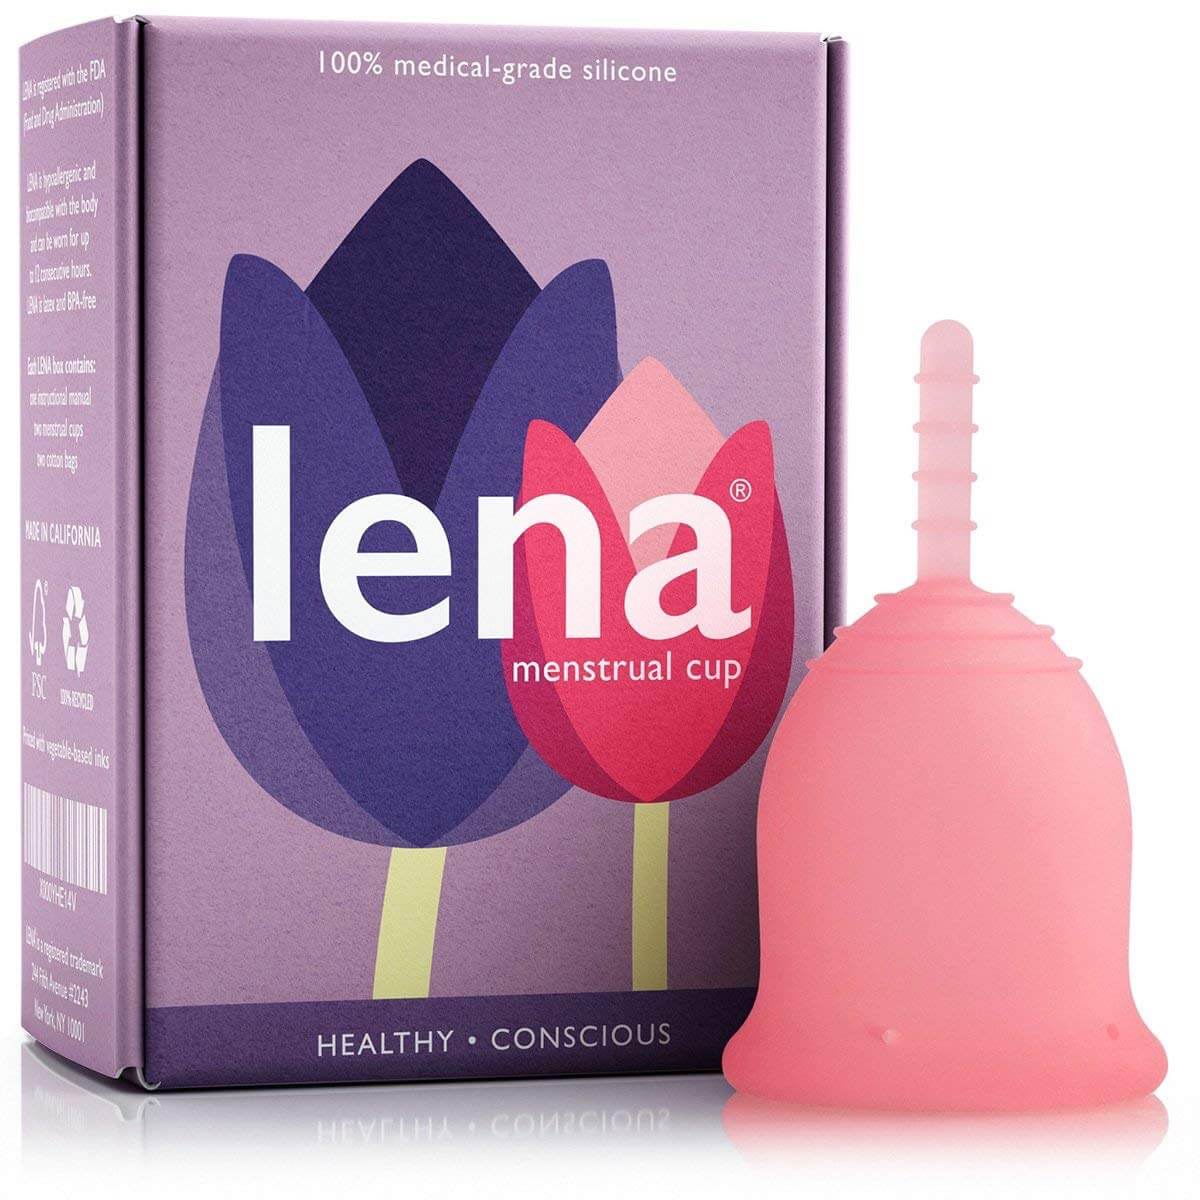 Lena Menstrual Cup Made in USA Tampon and Pad Alternative